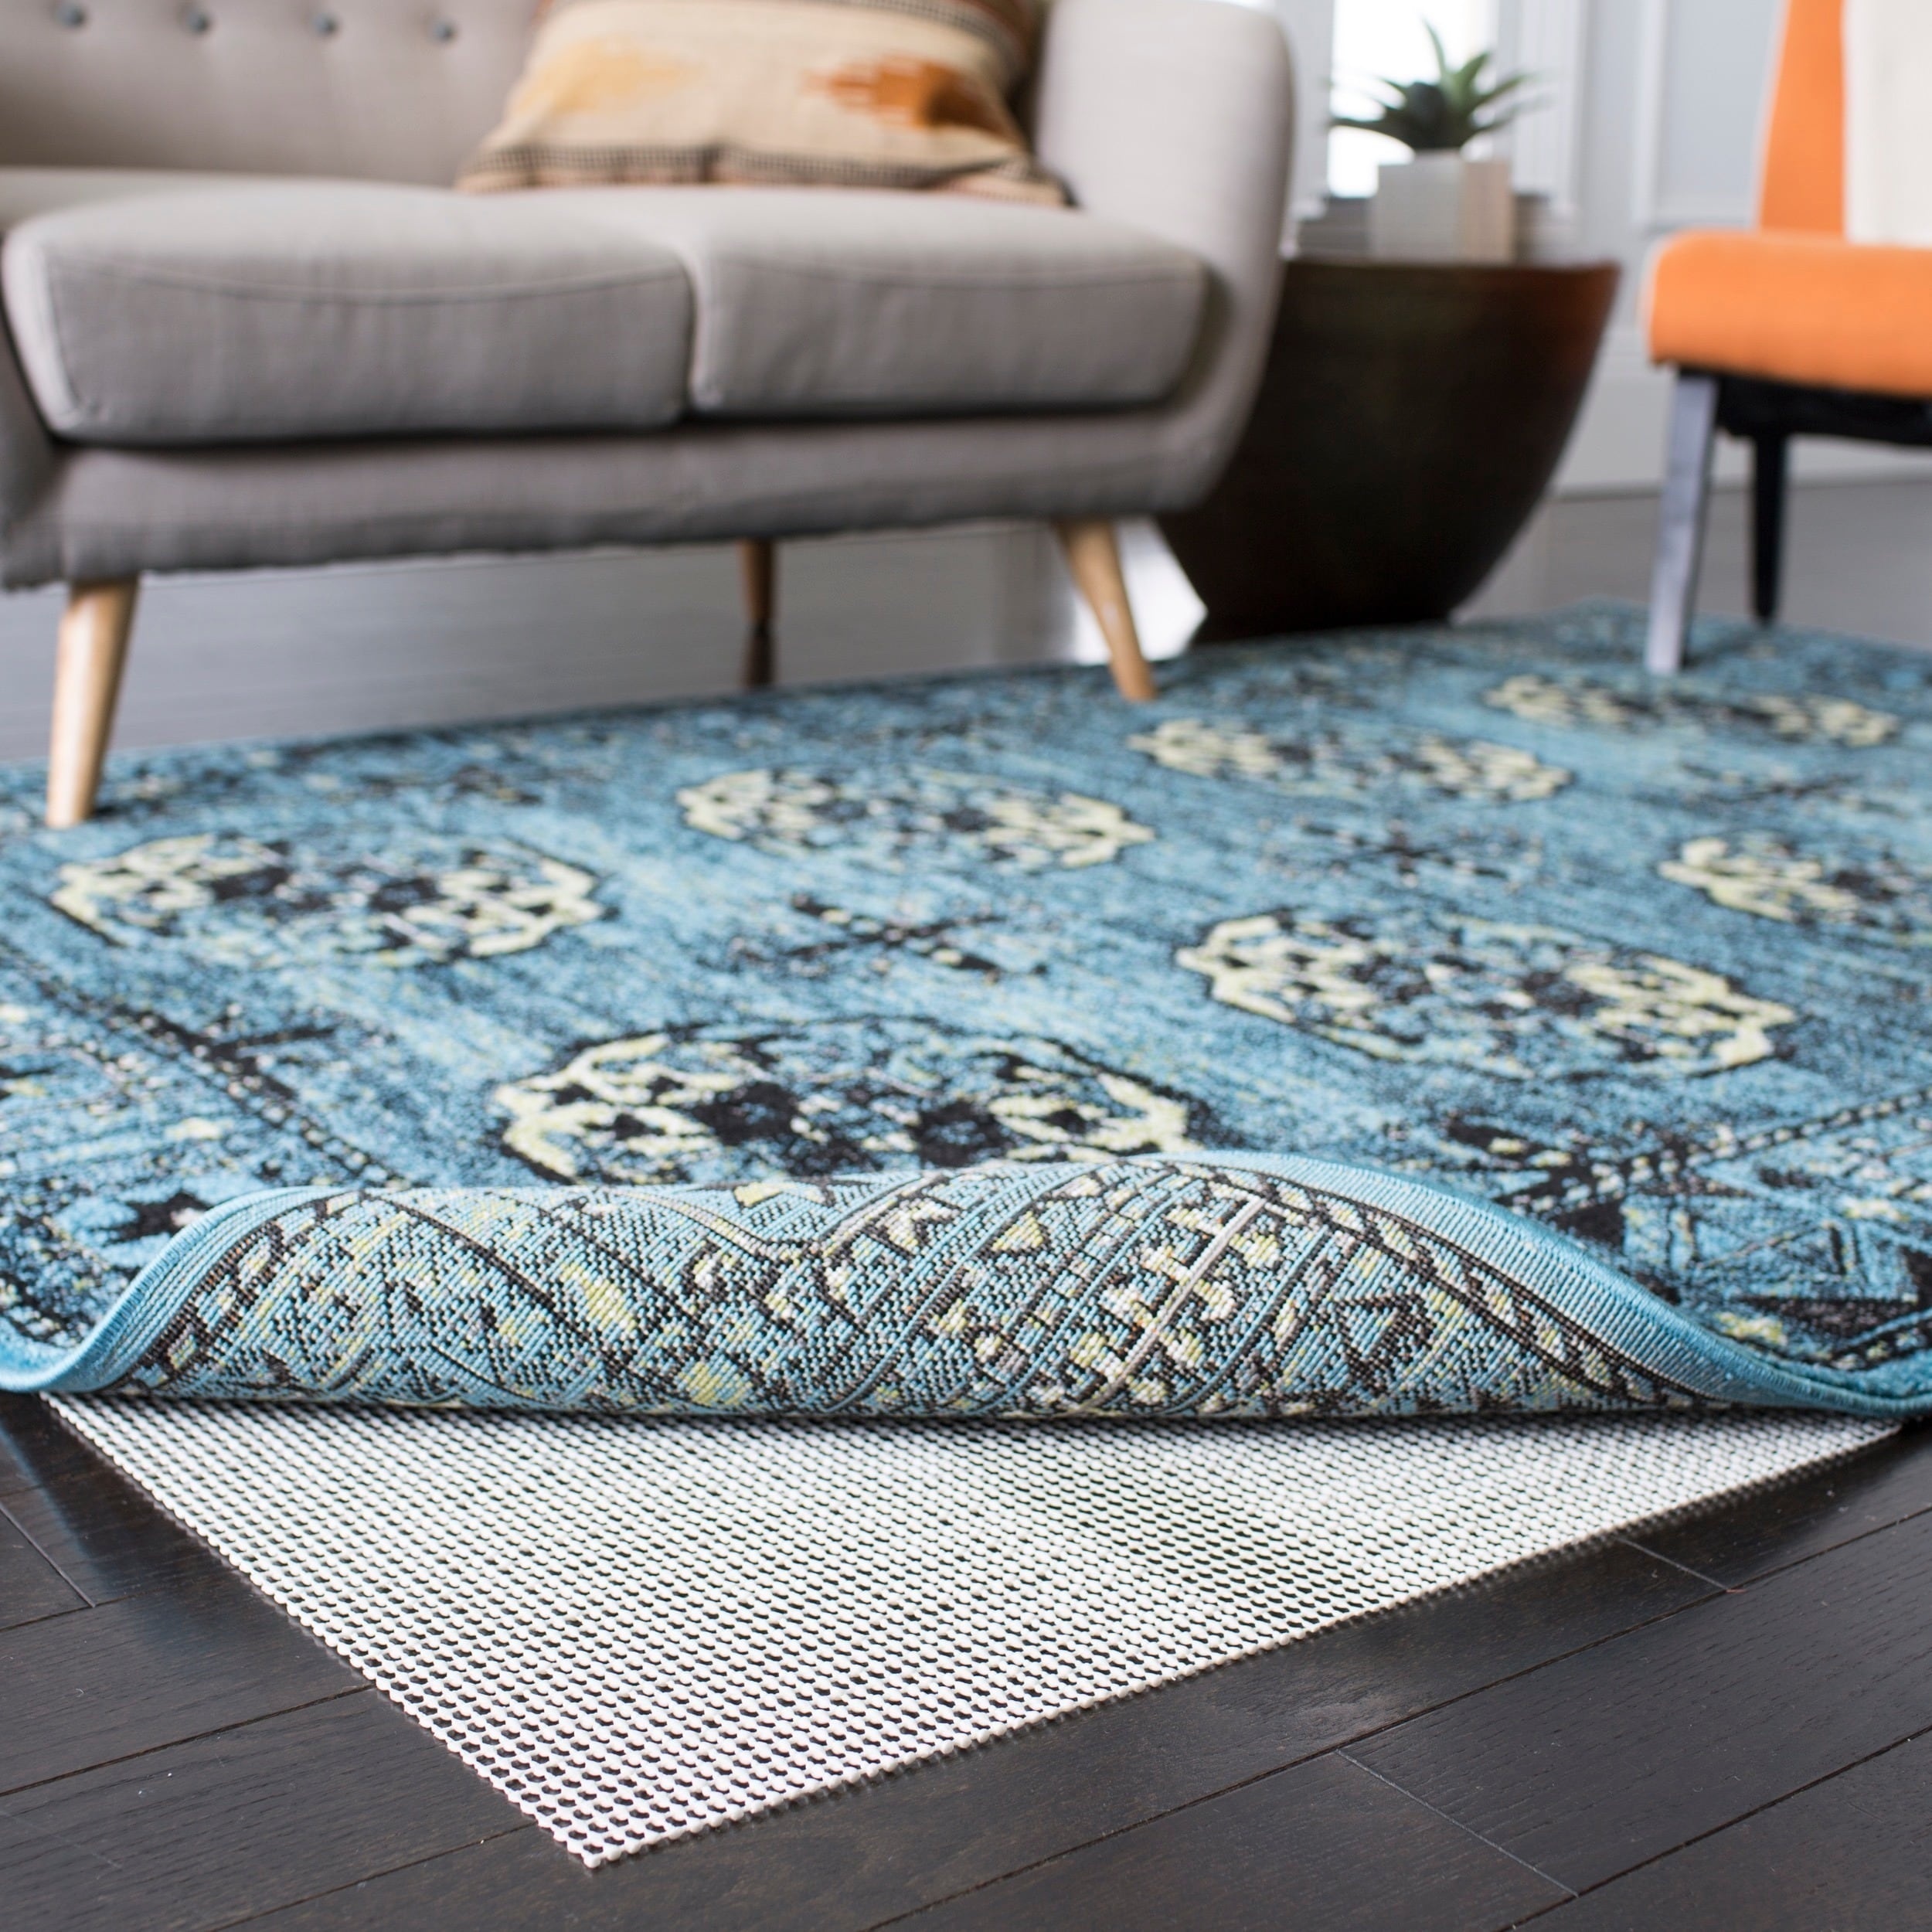 Multisurface Thin Rug Pad for 12'x15' Rug + Reviews